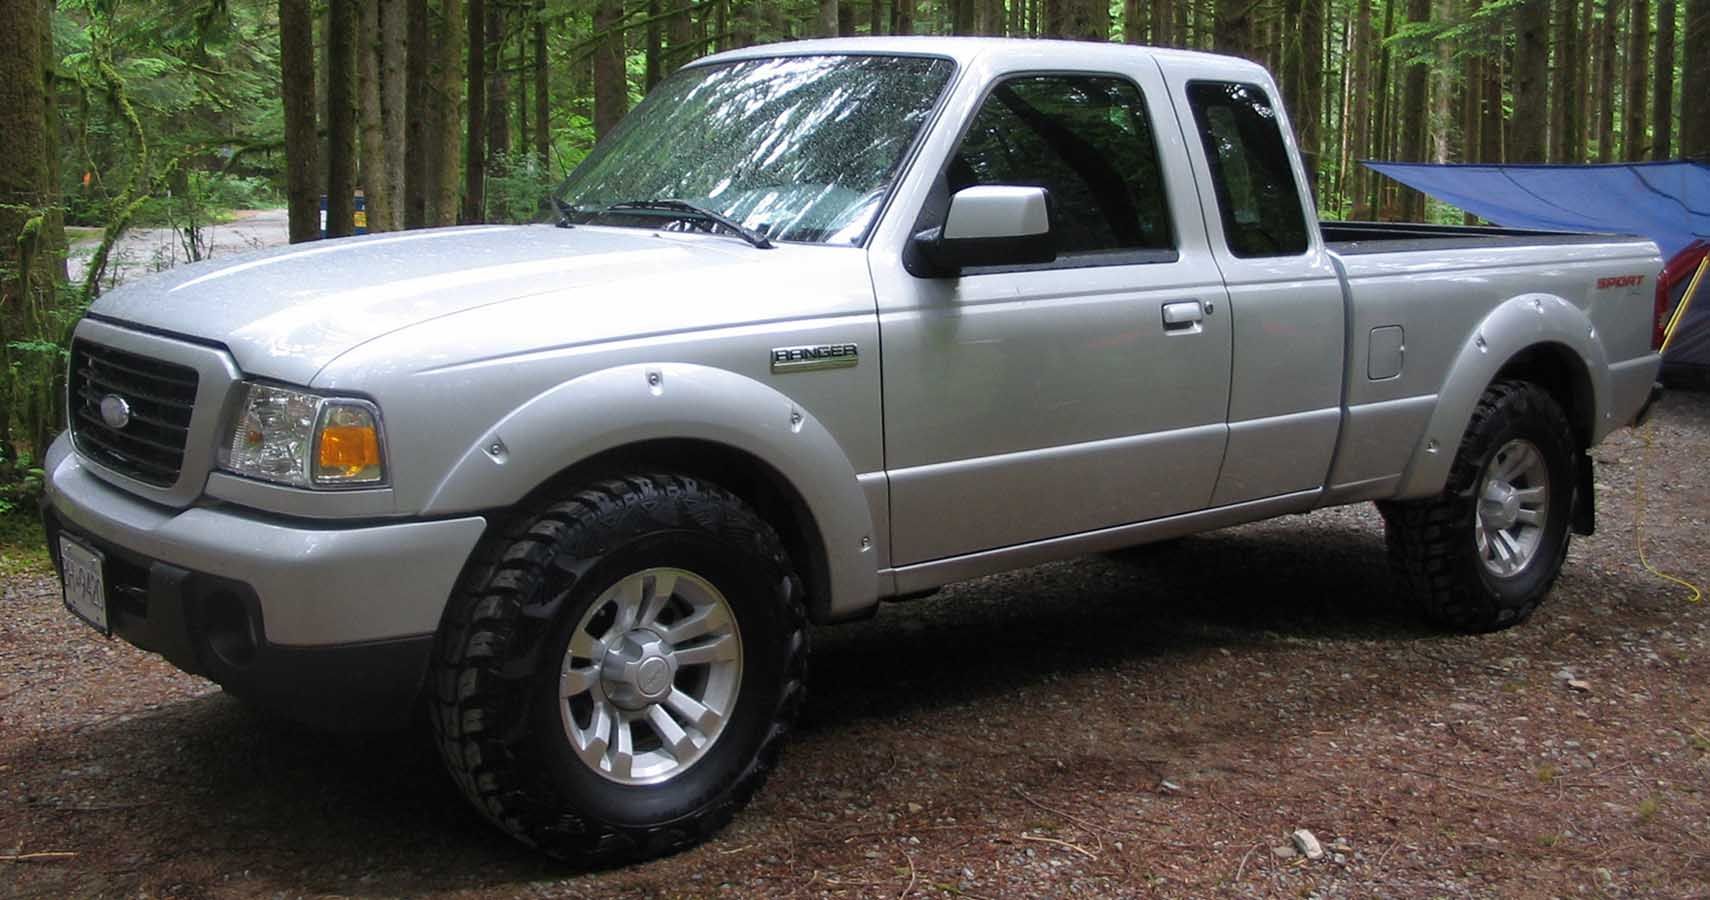 The Best Years Of Ford Ranger Are 2009-2011